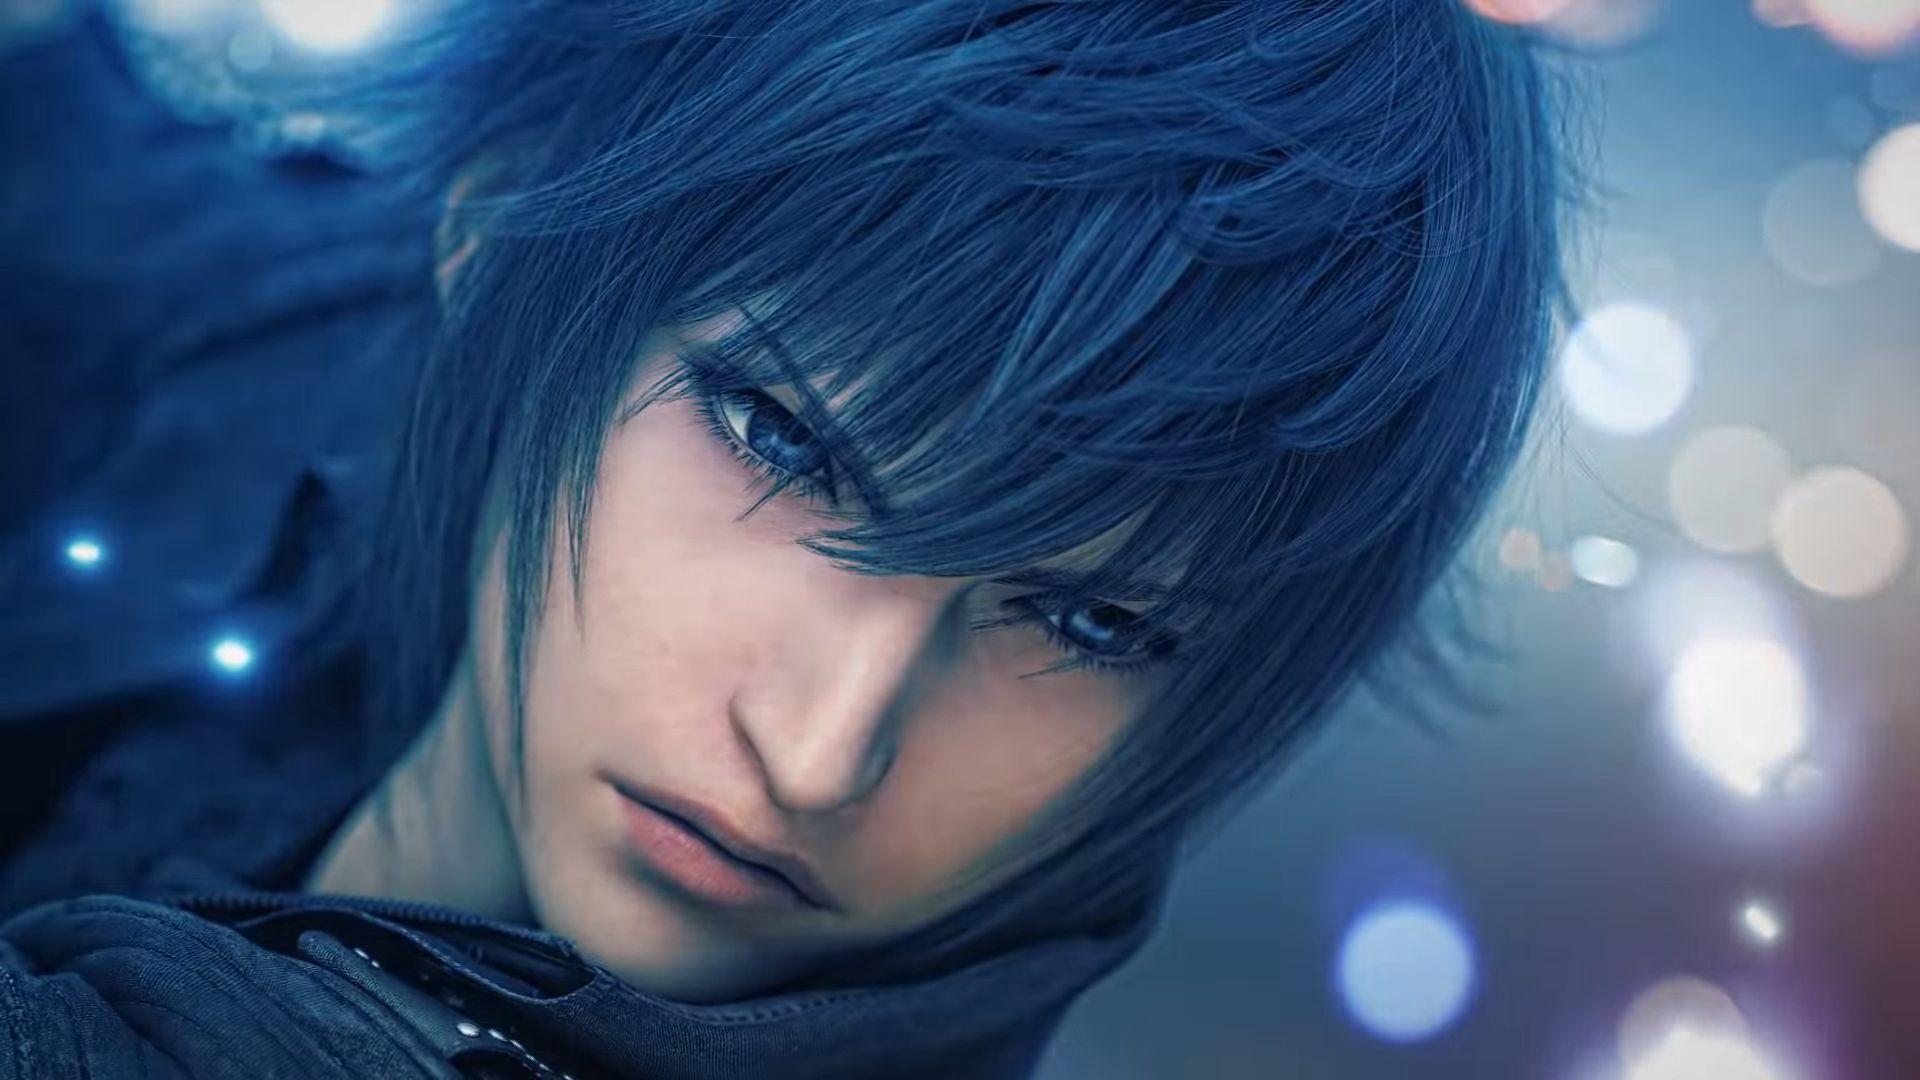 PS4 Exclusive Dissidia Final Fantasy NT Gets Videos to Teach You How